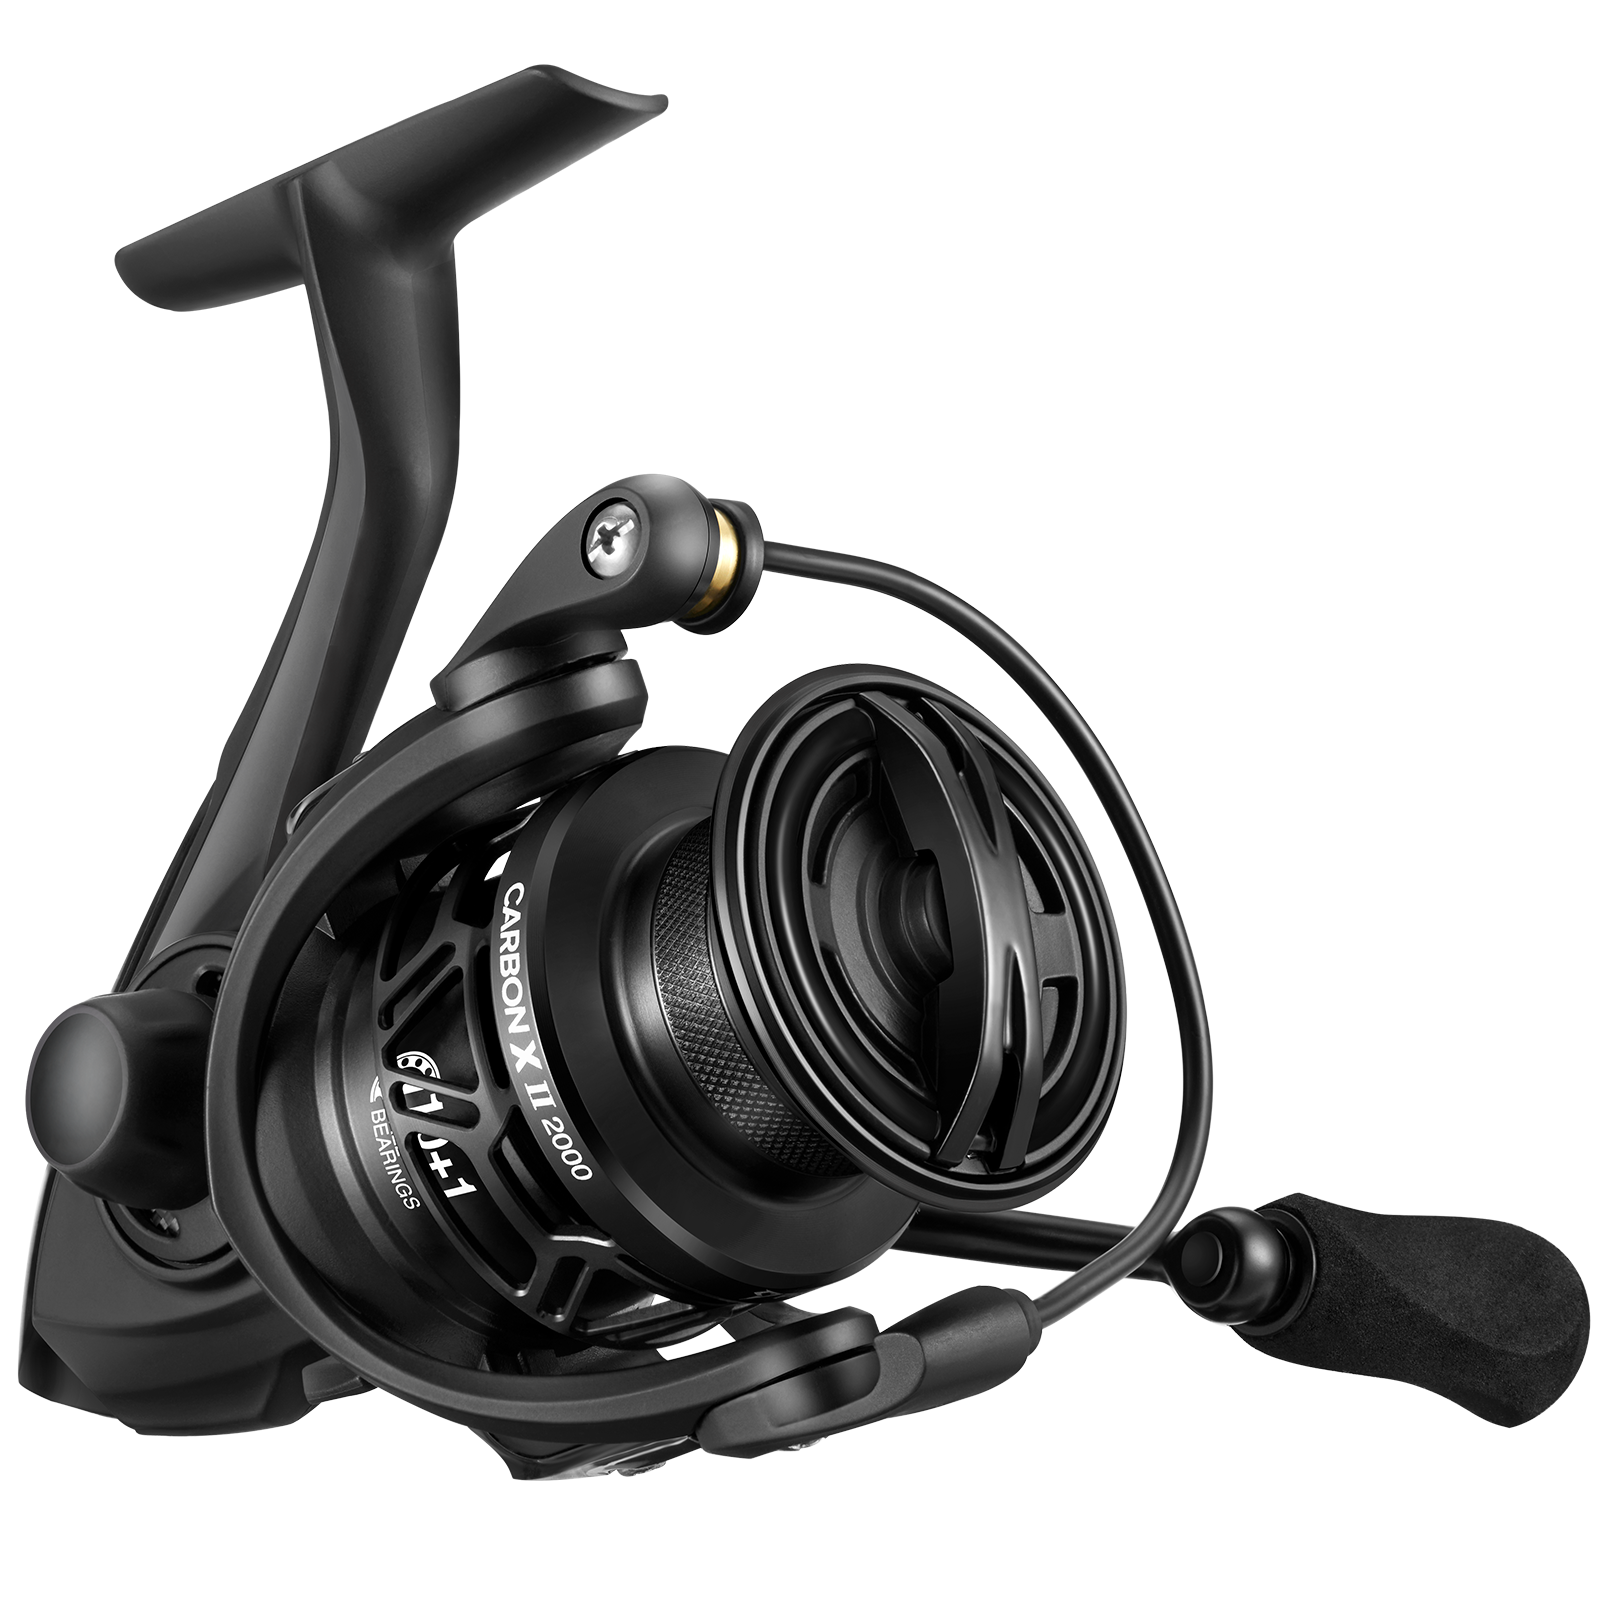 Piscifun® Carbon X II Spinning Reels, 1000 / Black（Ships on Mar.20th）